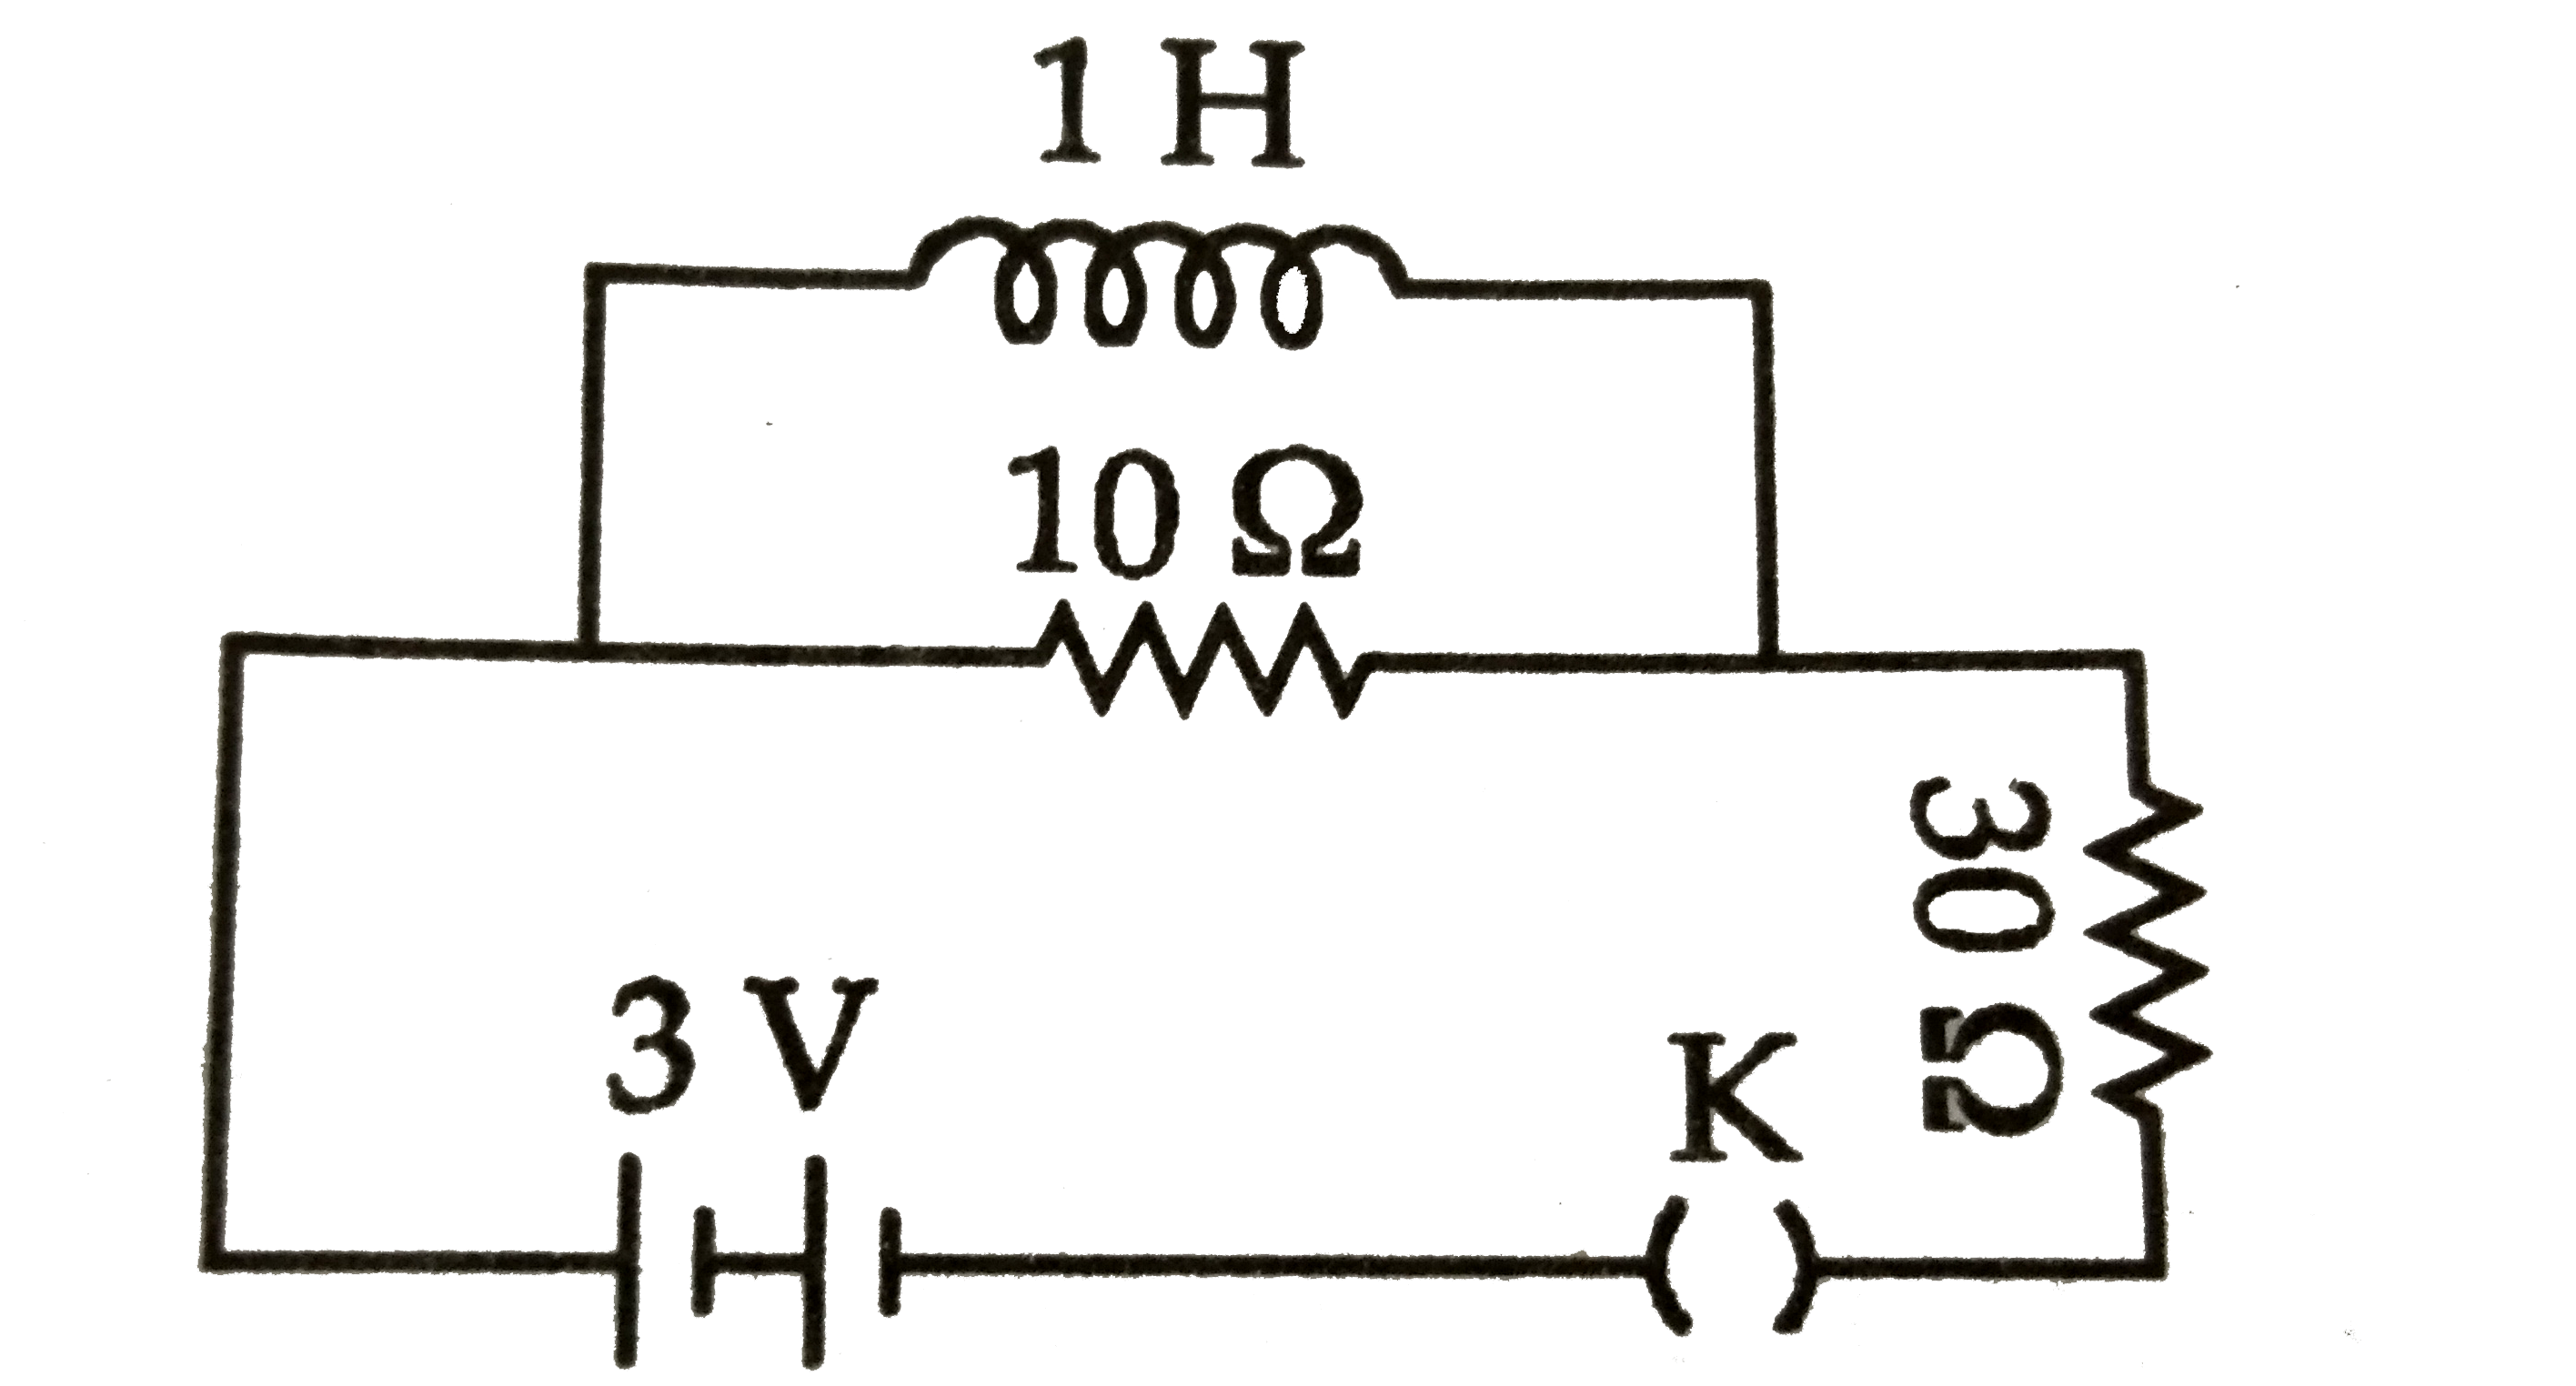 The value of current in 10 Omega resistor, when plug of key K is inserted in the adjoining figure is